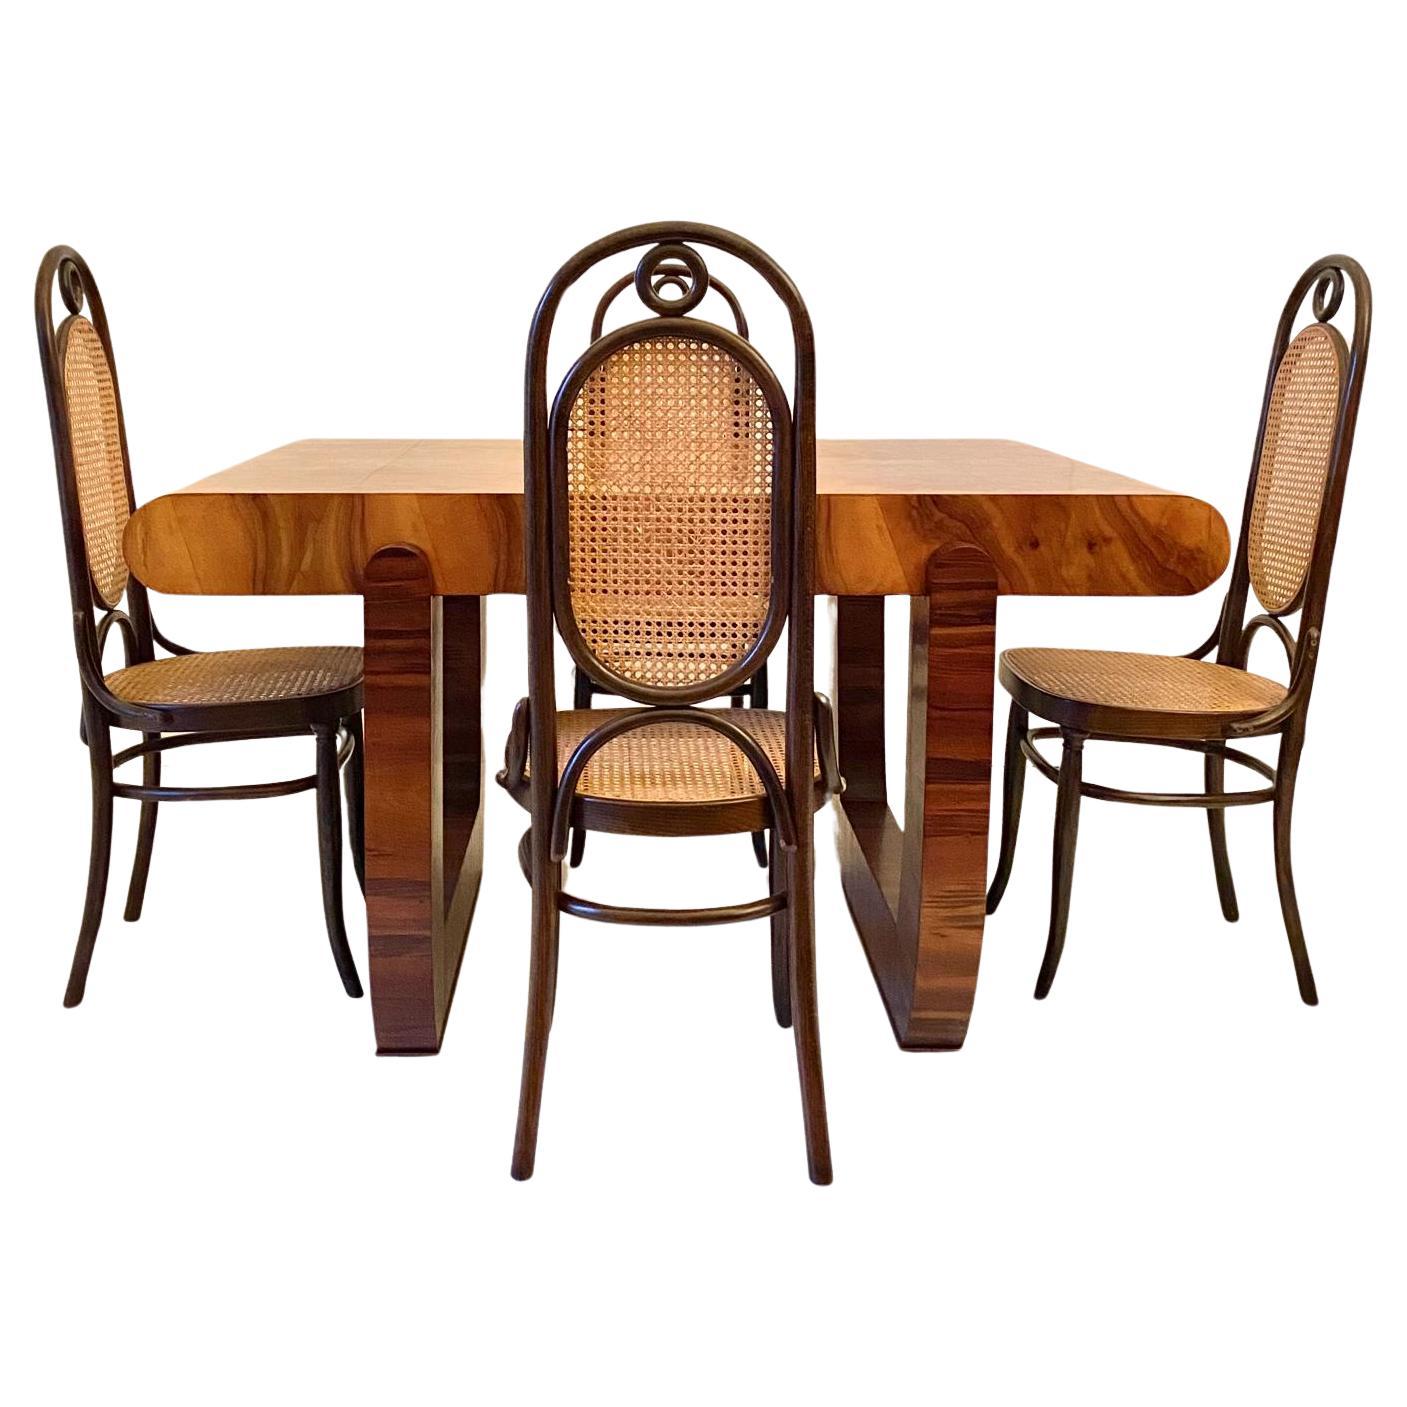 Art deco dining room set made by Art deco walnut table with refined briar root top and four Thonet chairs 